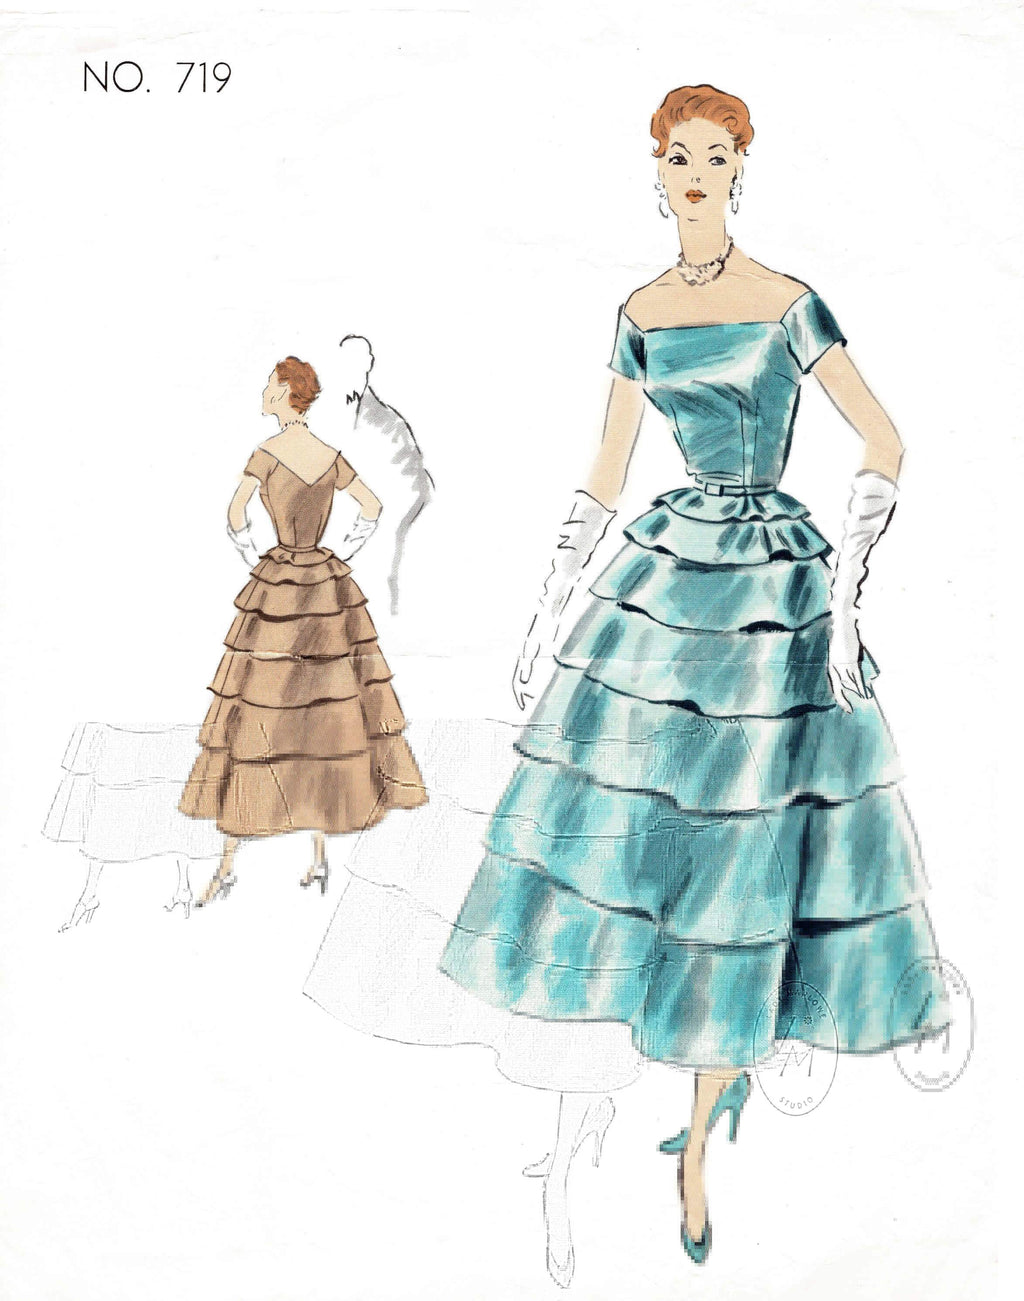 1950s ball gown